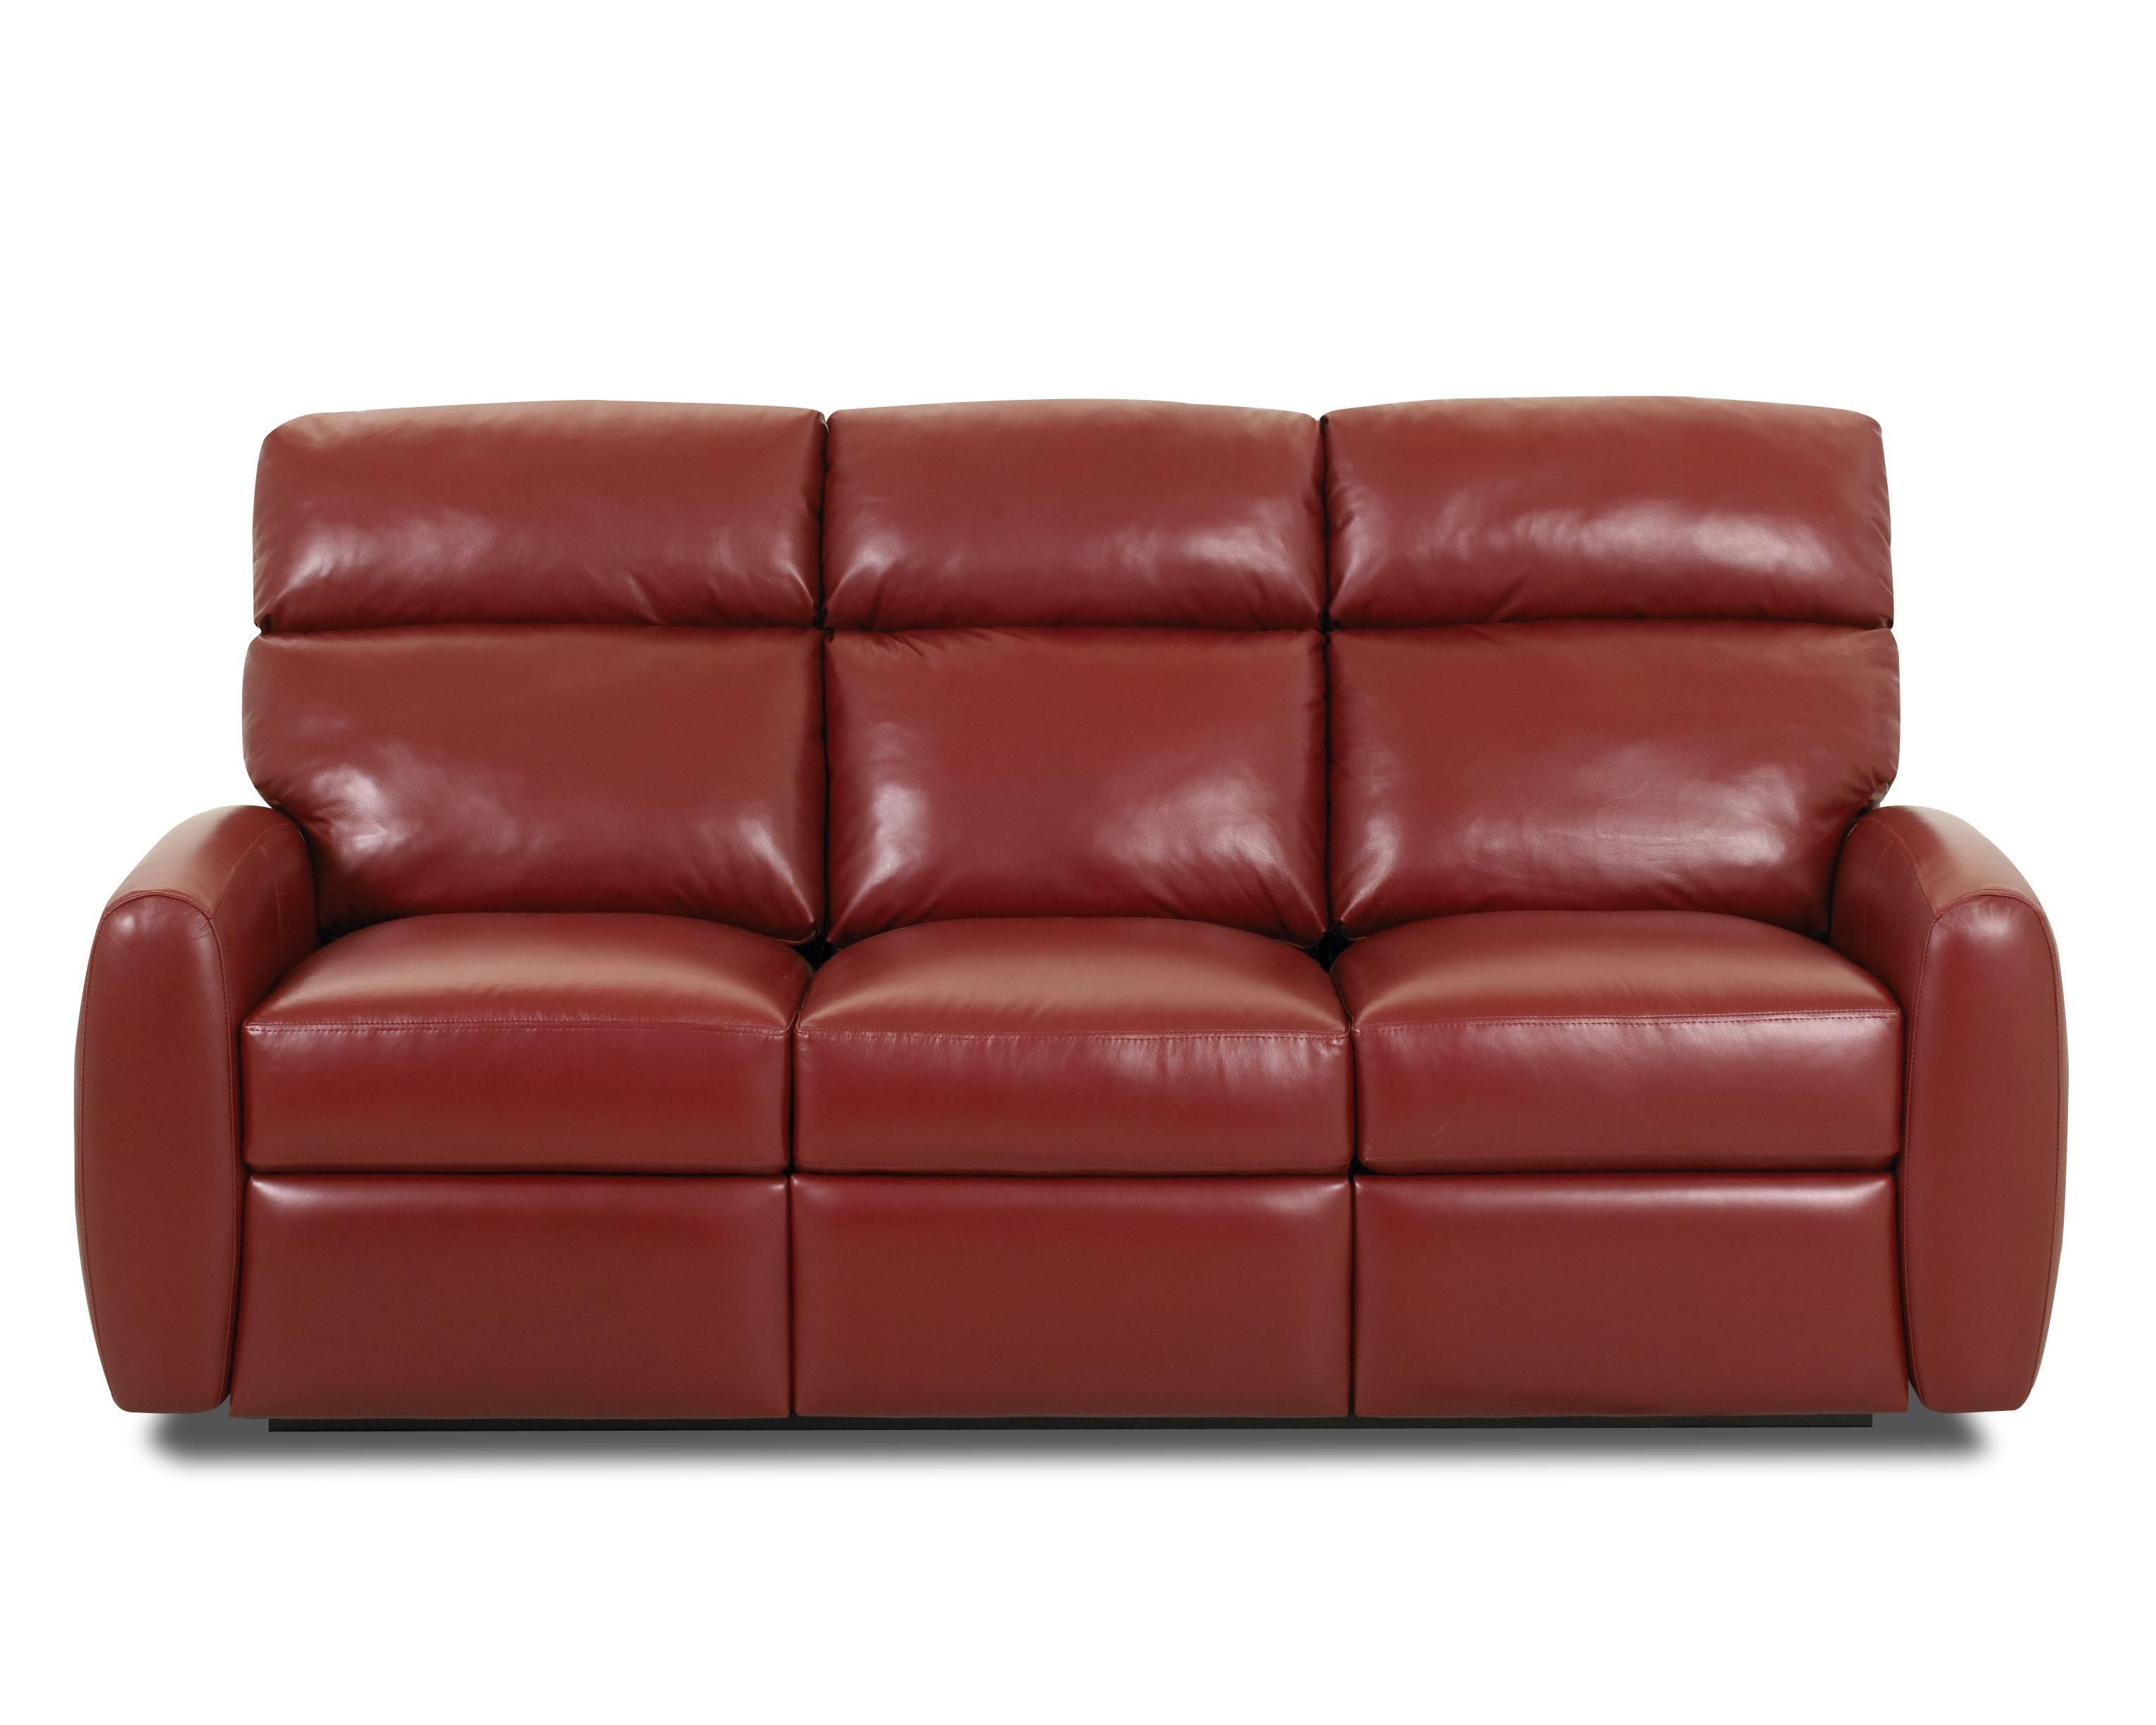 small red leather sofa bed